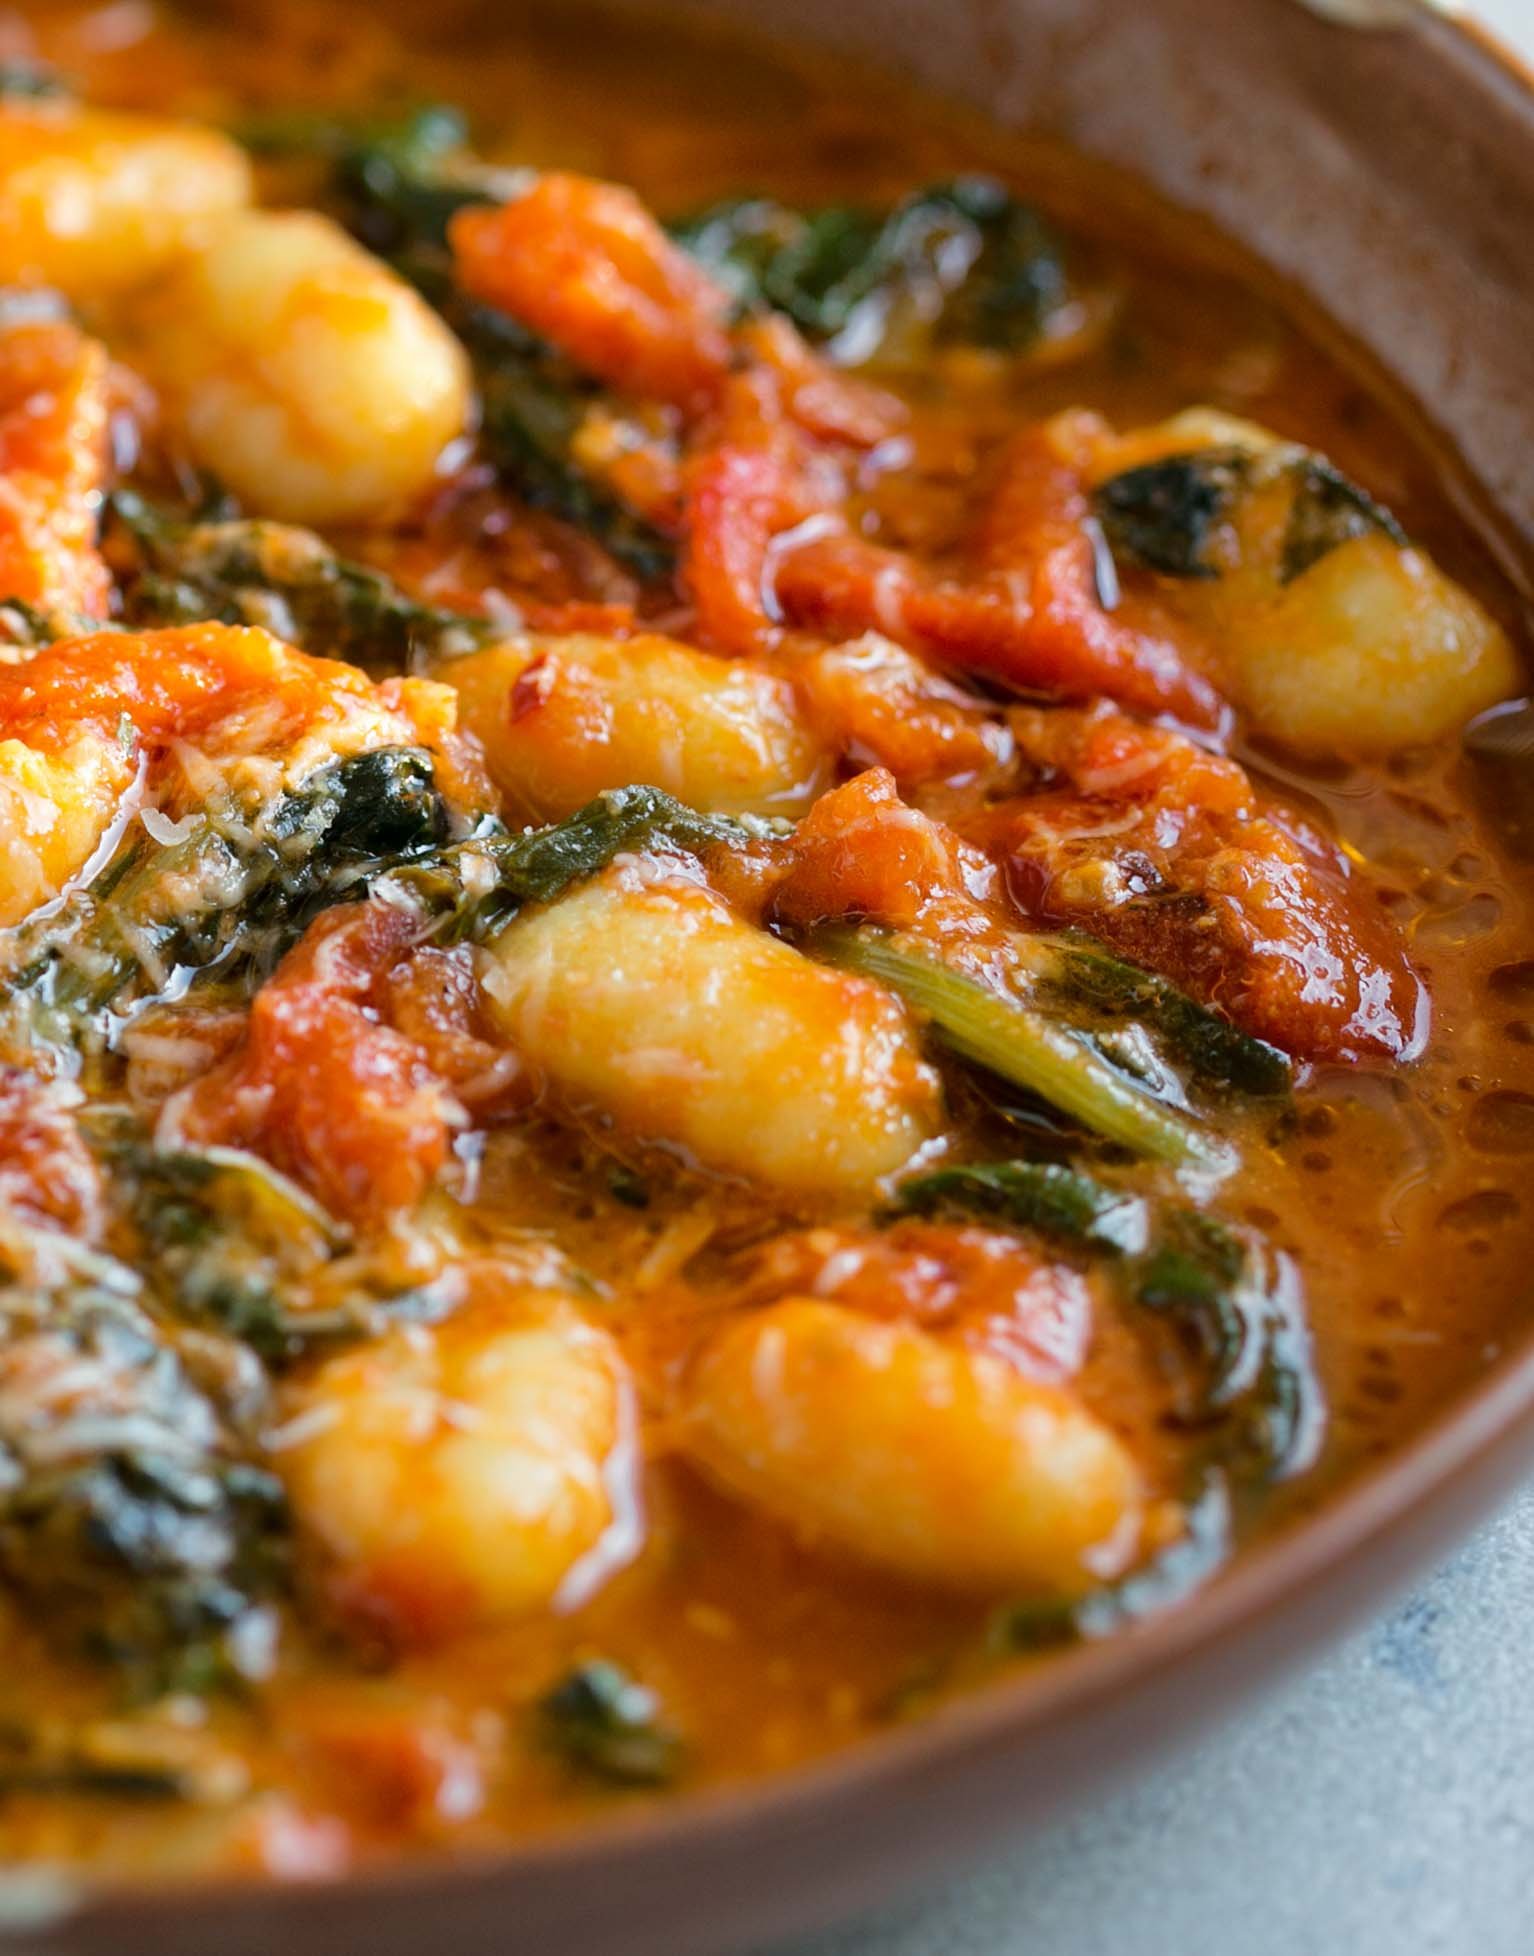 Gnocchi with Swiss Chard and Roasted Tomato Parmesan Sauce